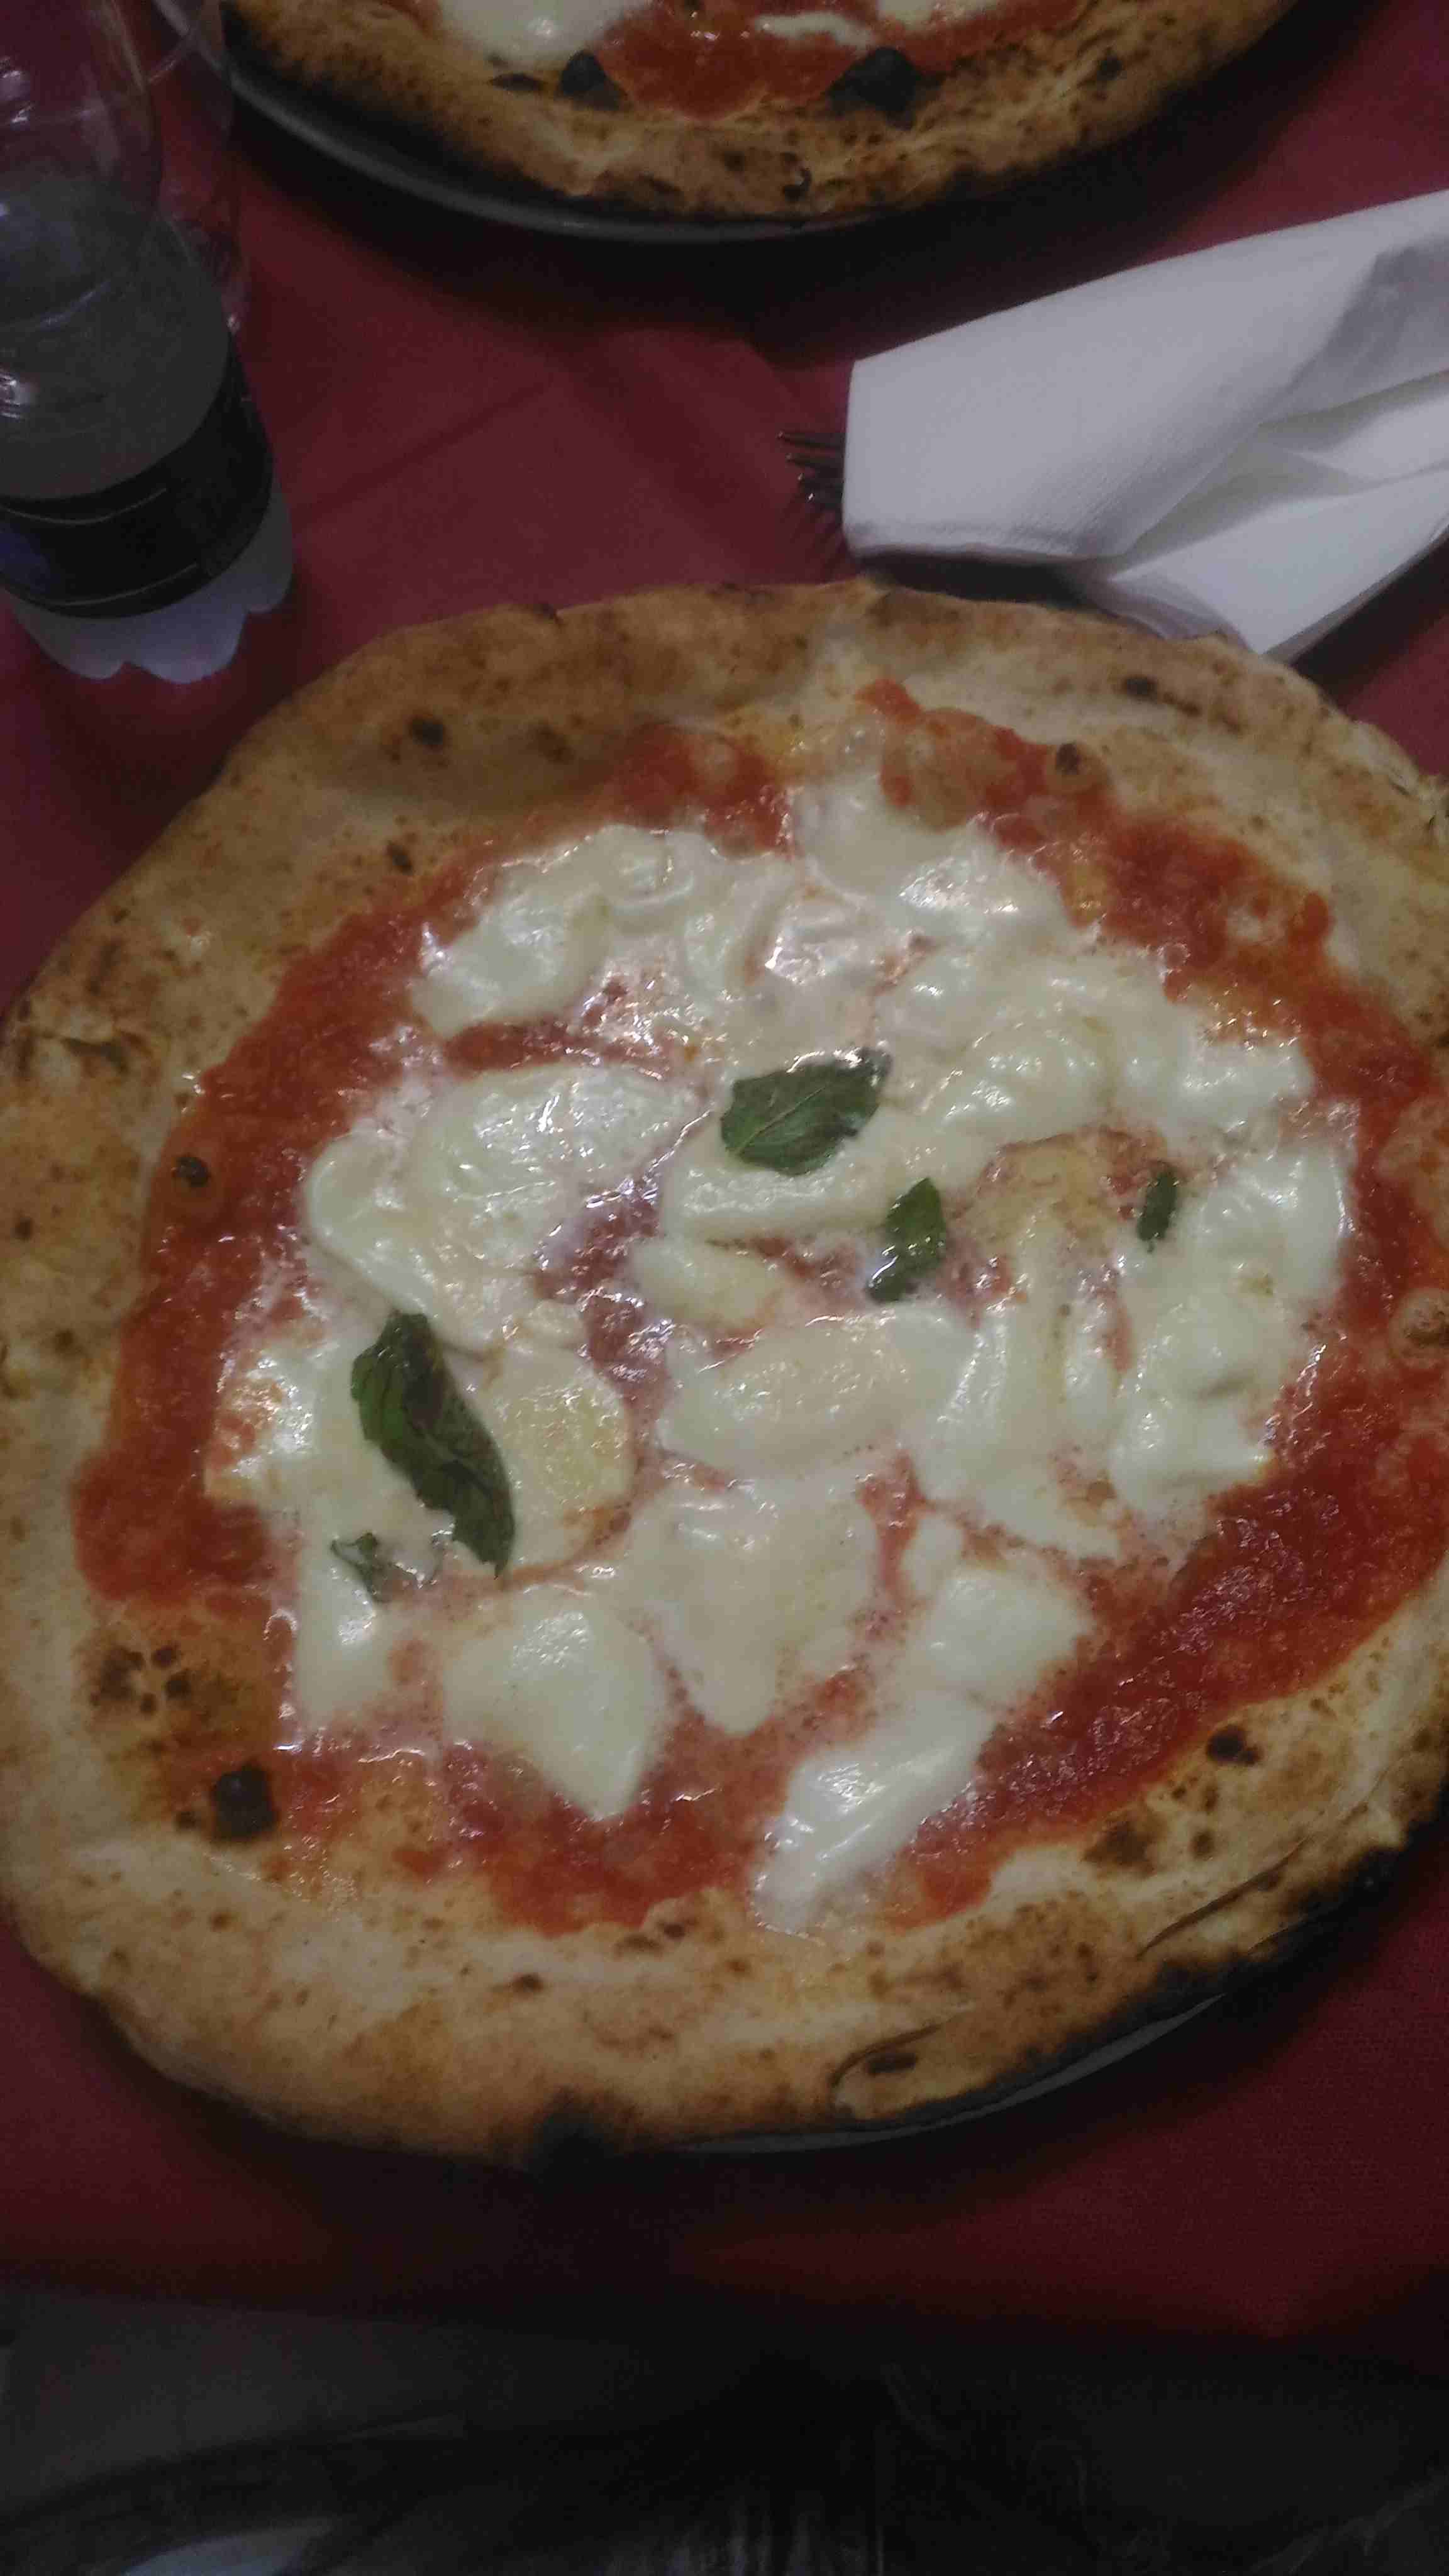 A margherita with lots of mozzarella.